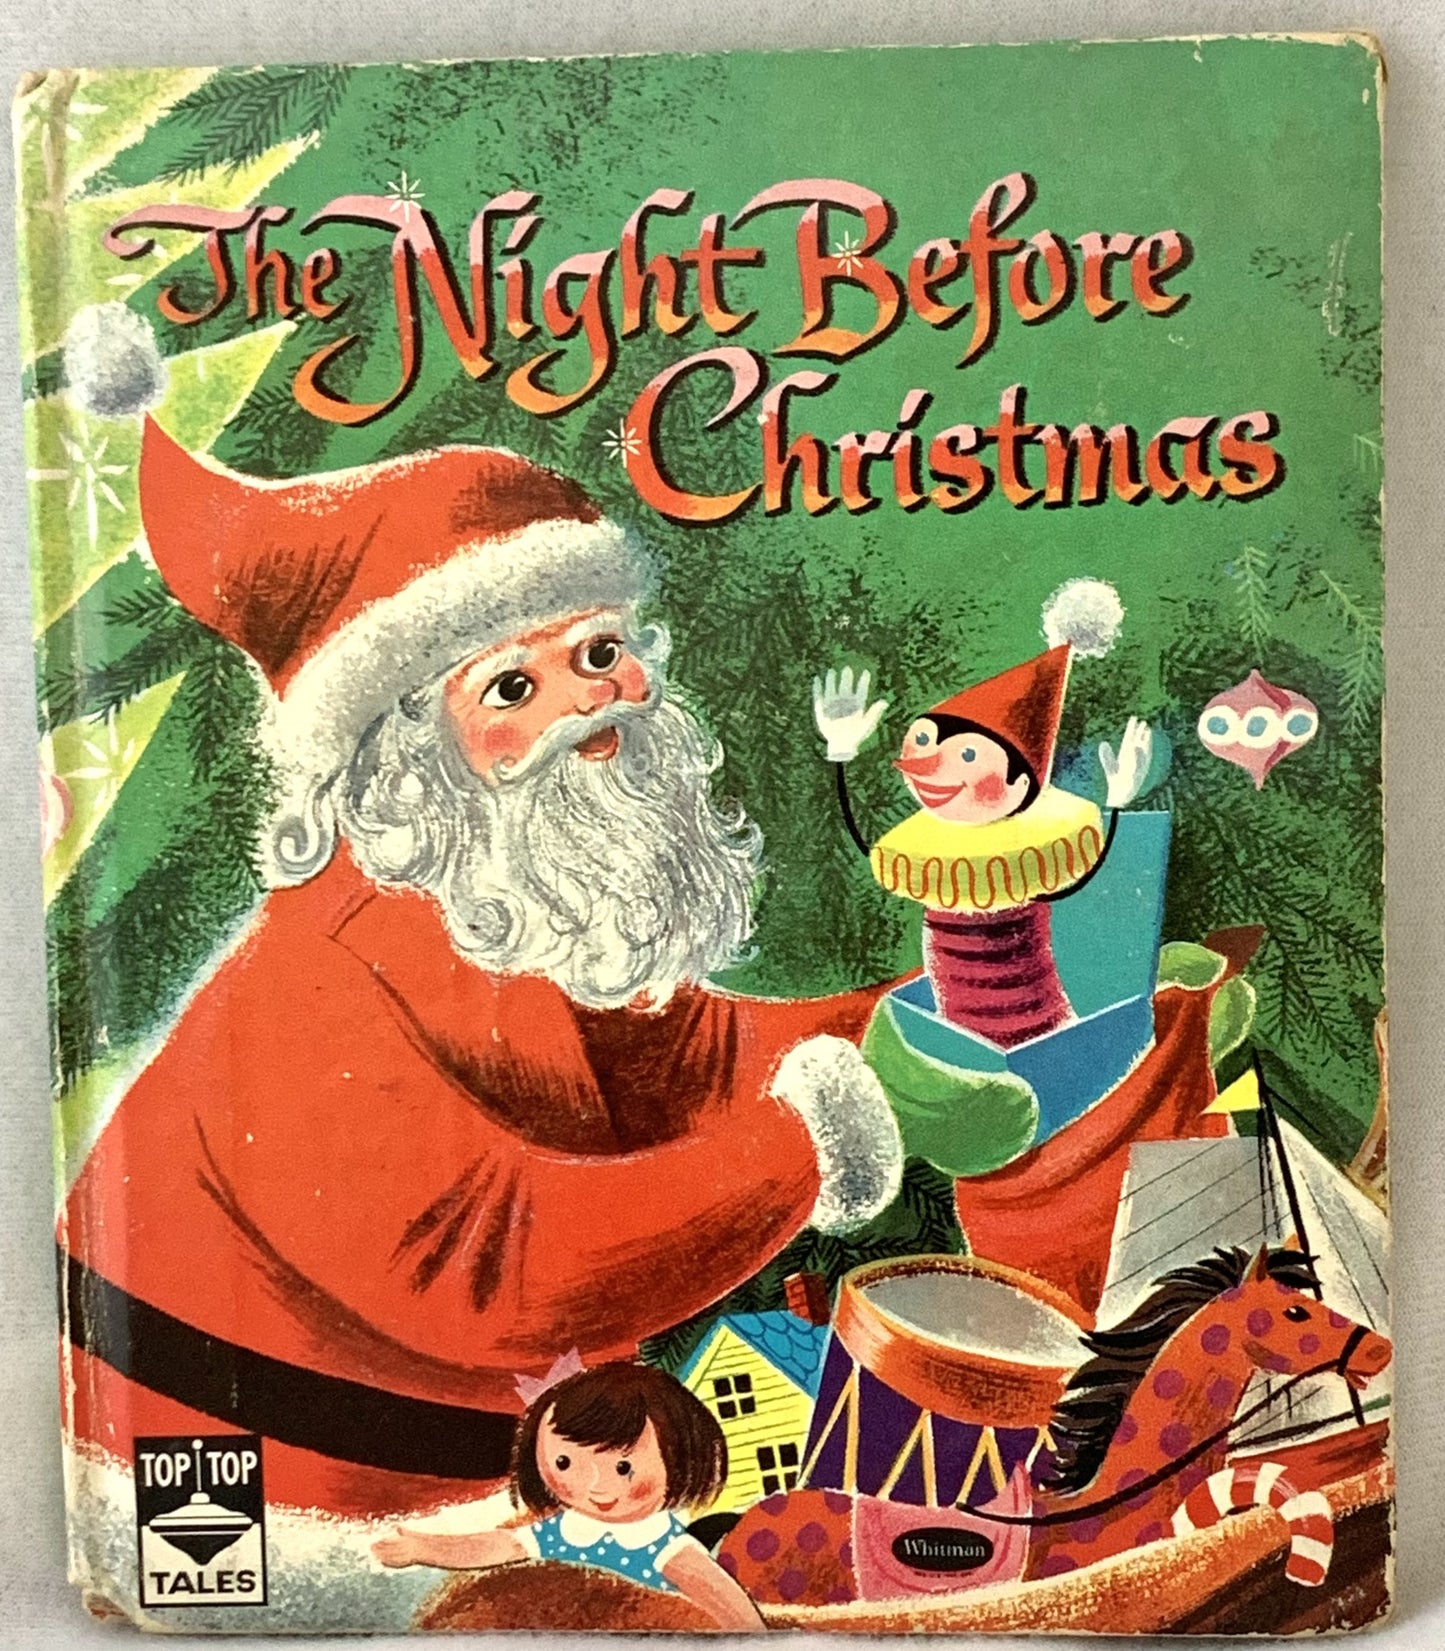 The Night Before Christmas-Top Top Tales by Whitman